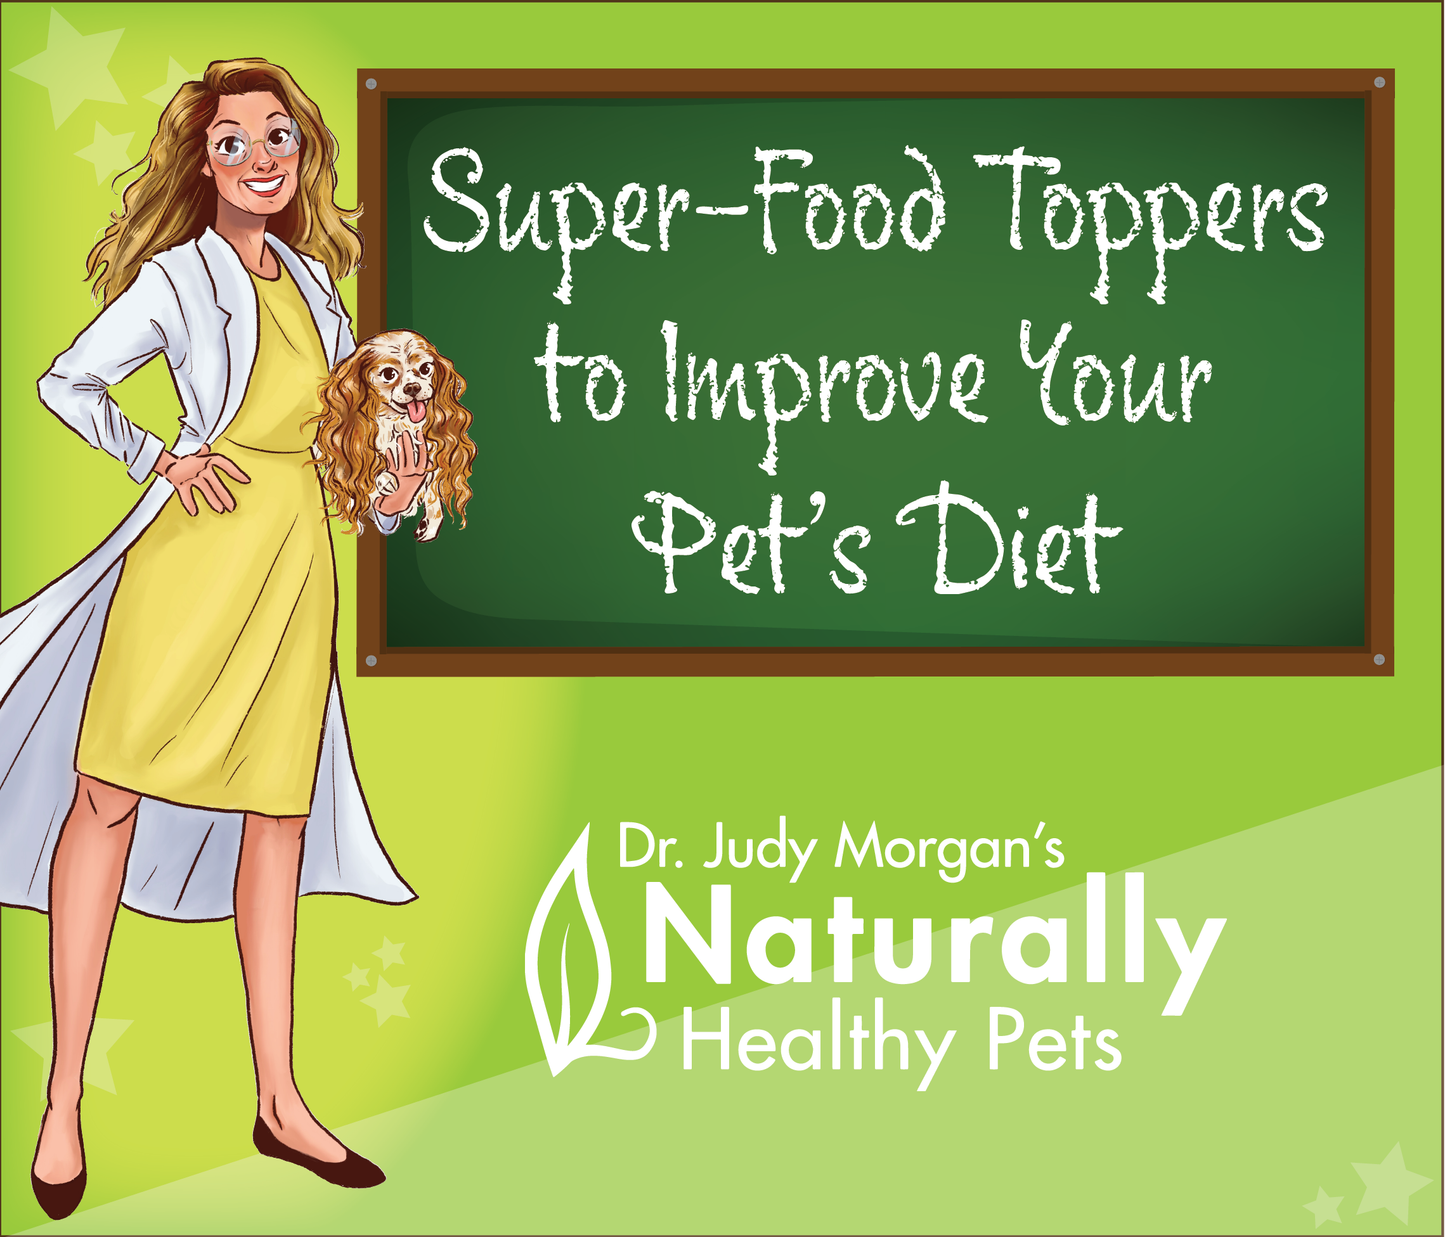 Super Food Toppers to Improve Your Pet's Diet